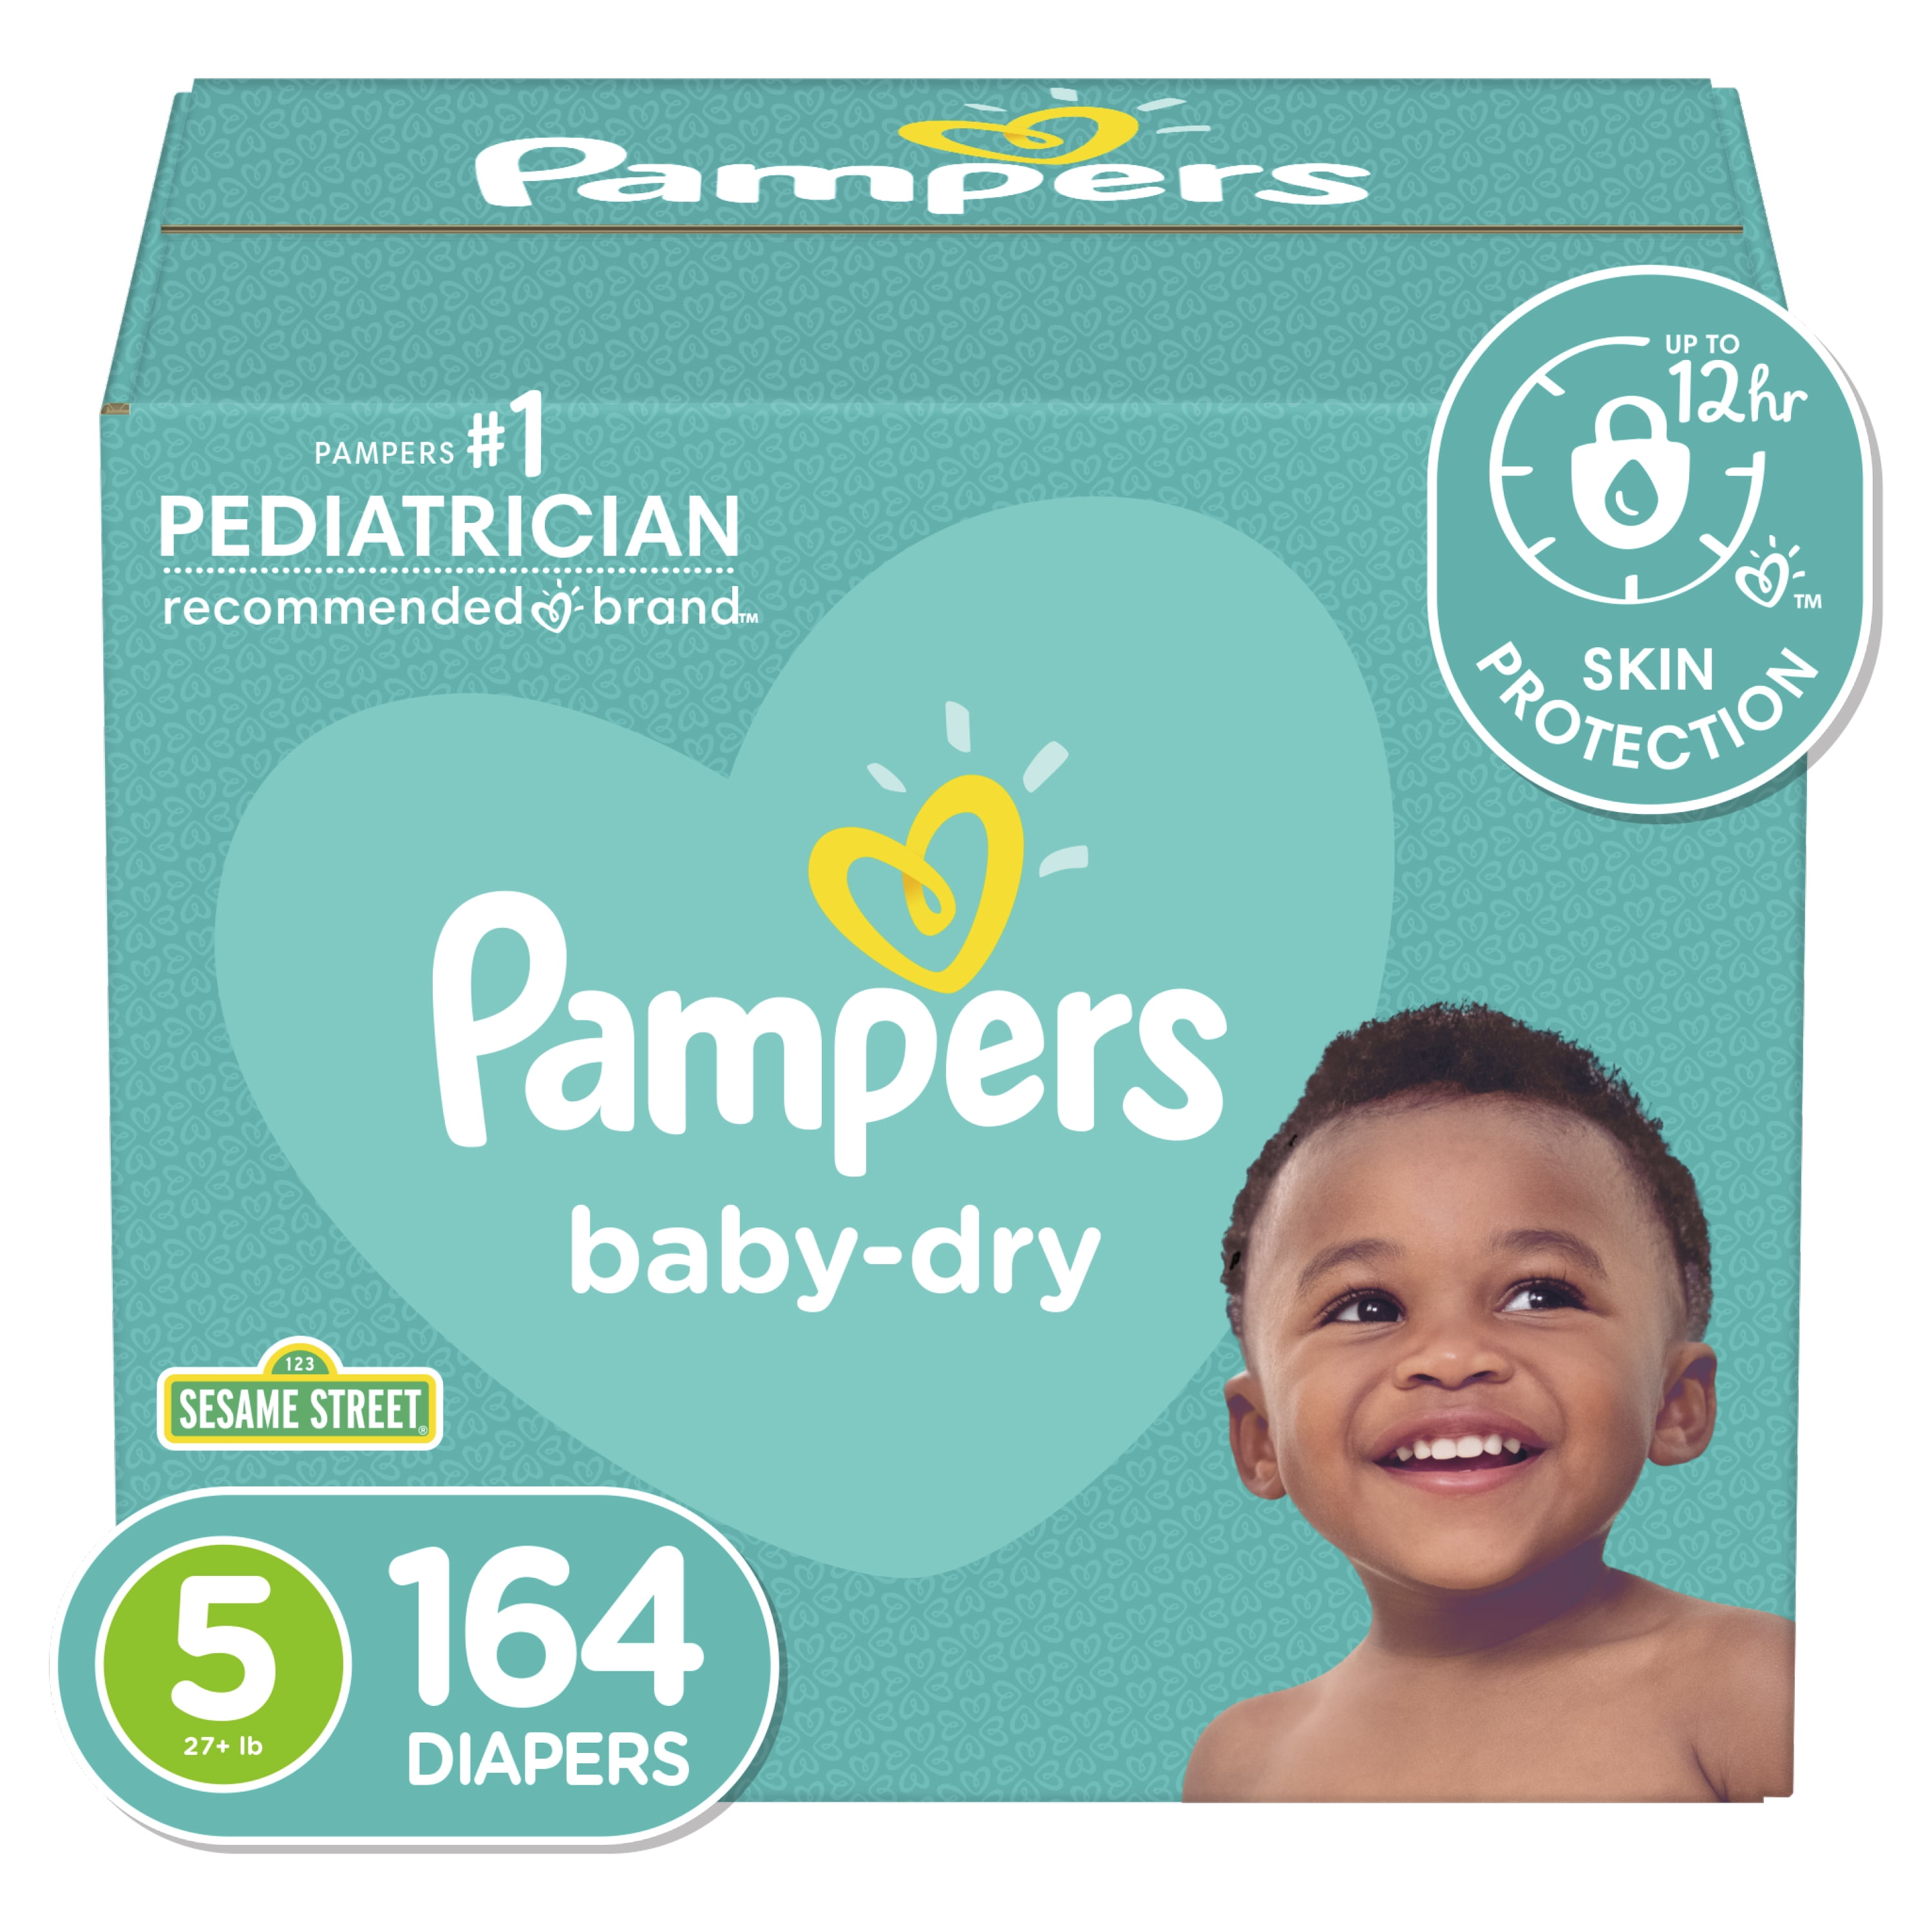 Baby-Dry Protection Diapers, Size 5, Count - Walmart.com